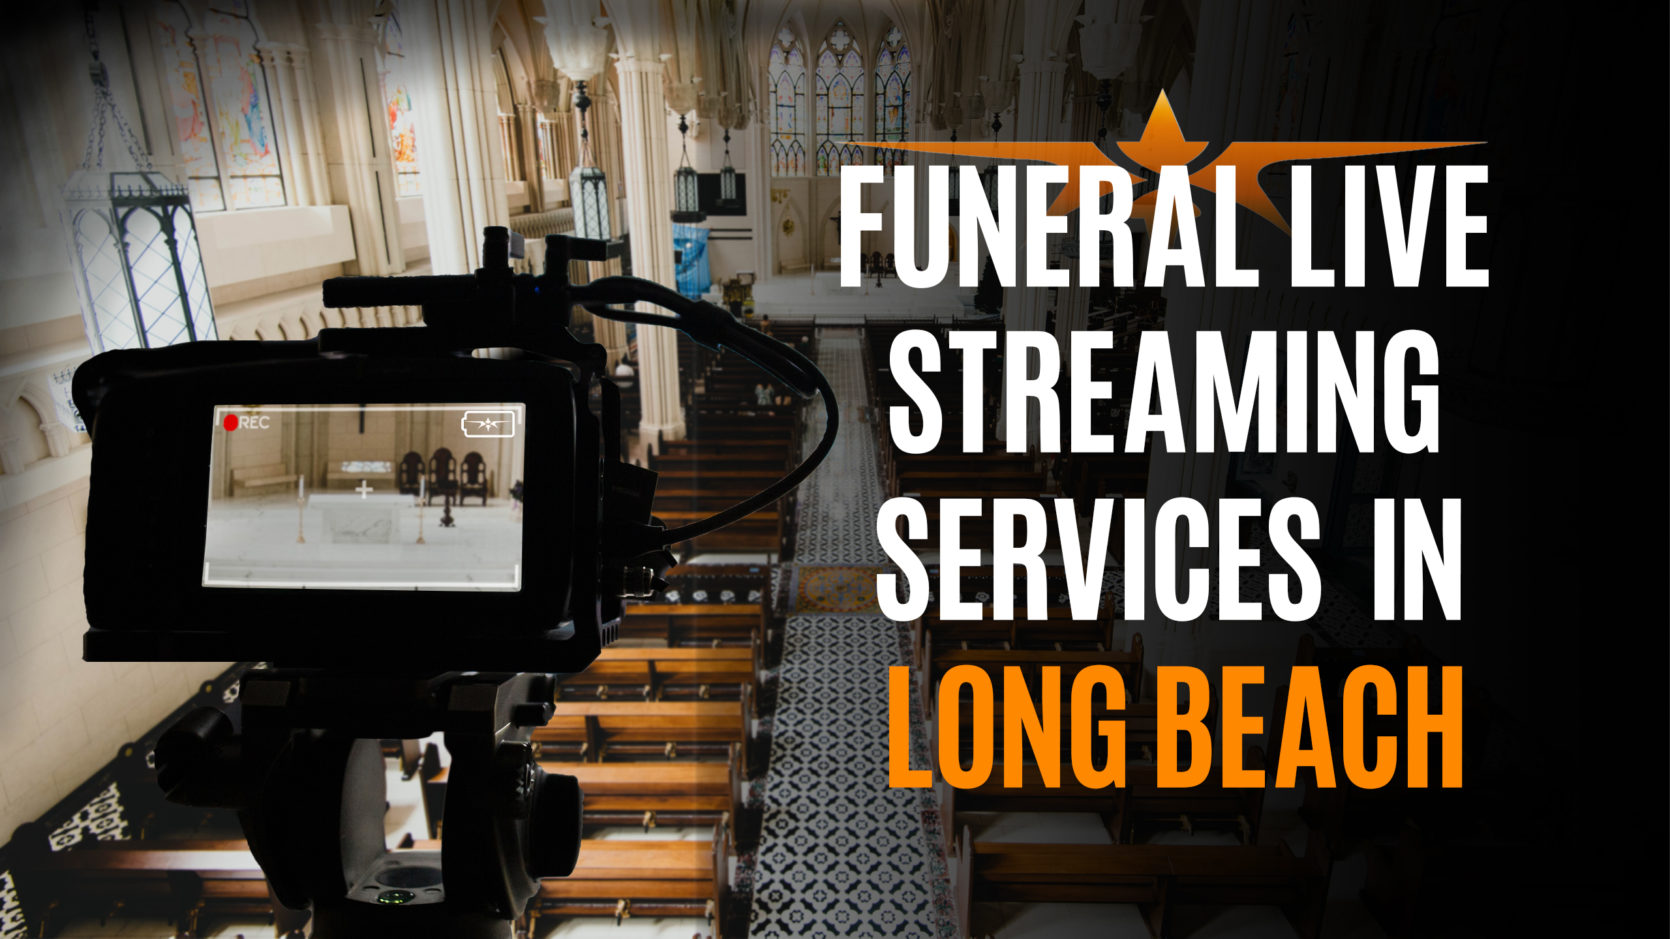 Funeral Live Streaming Services in Long Beach